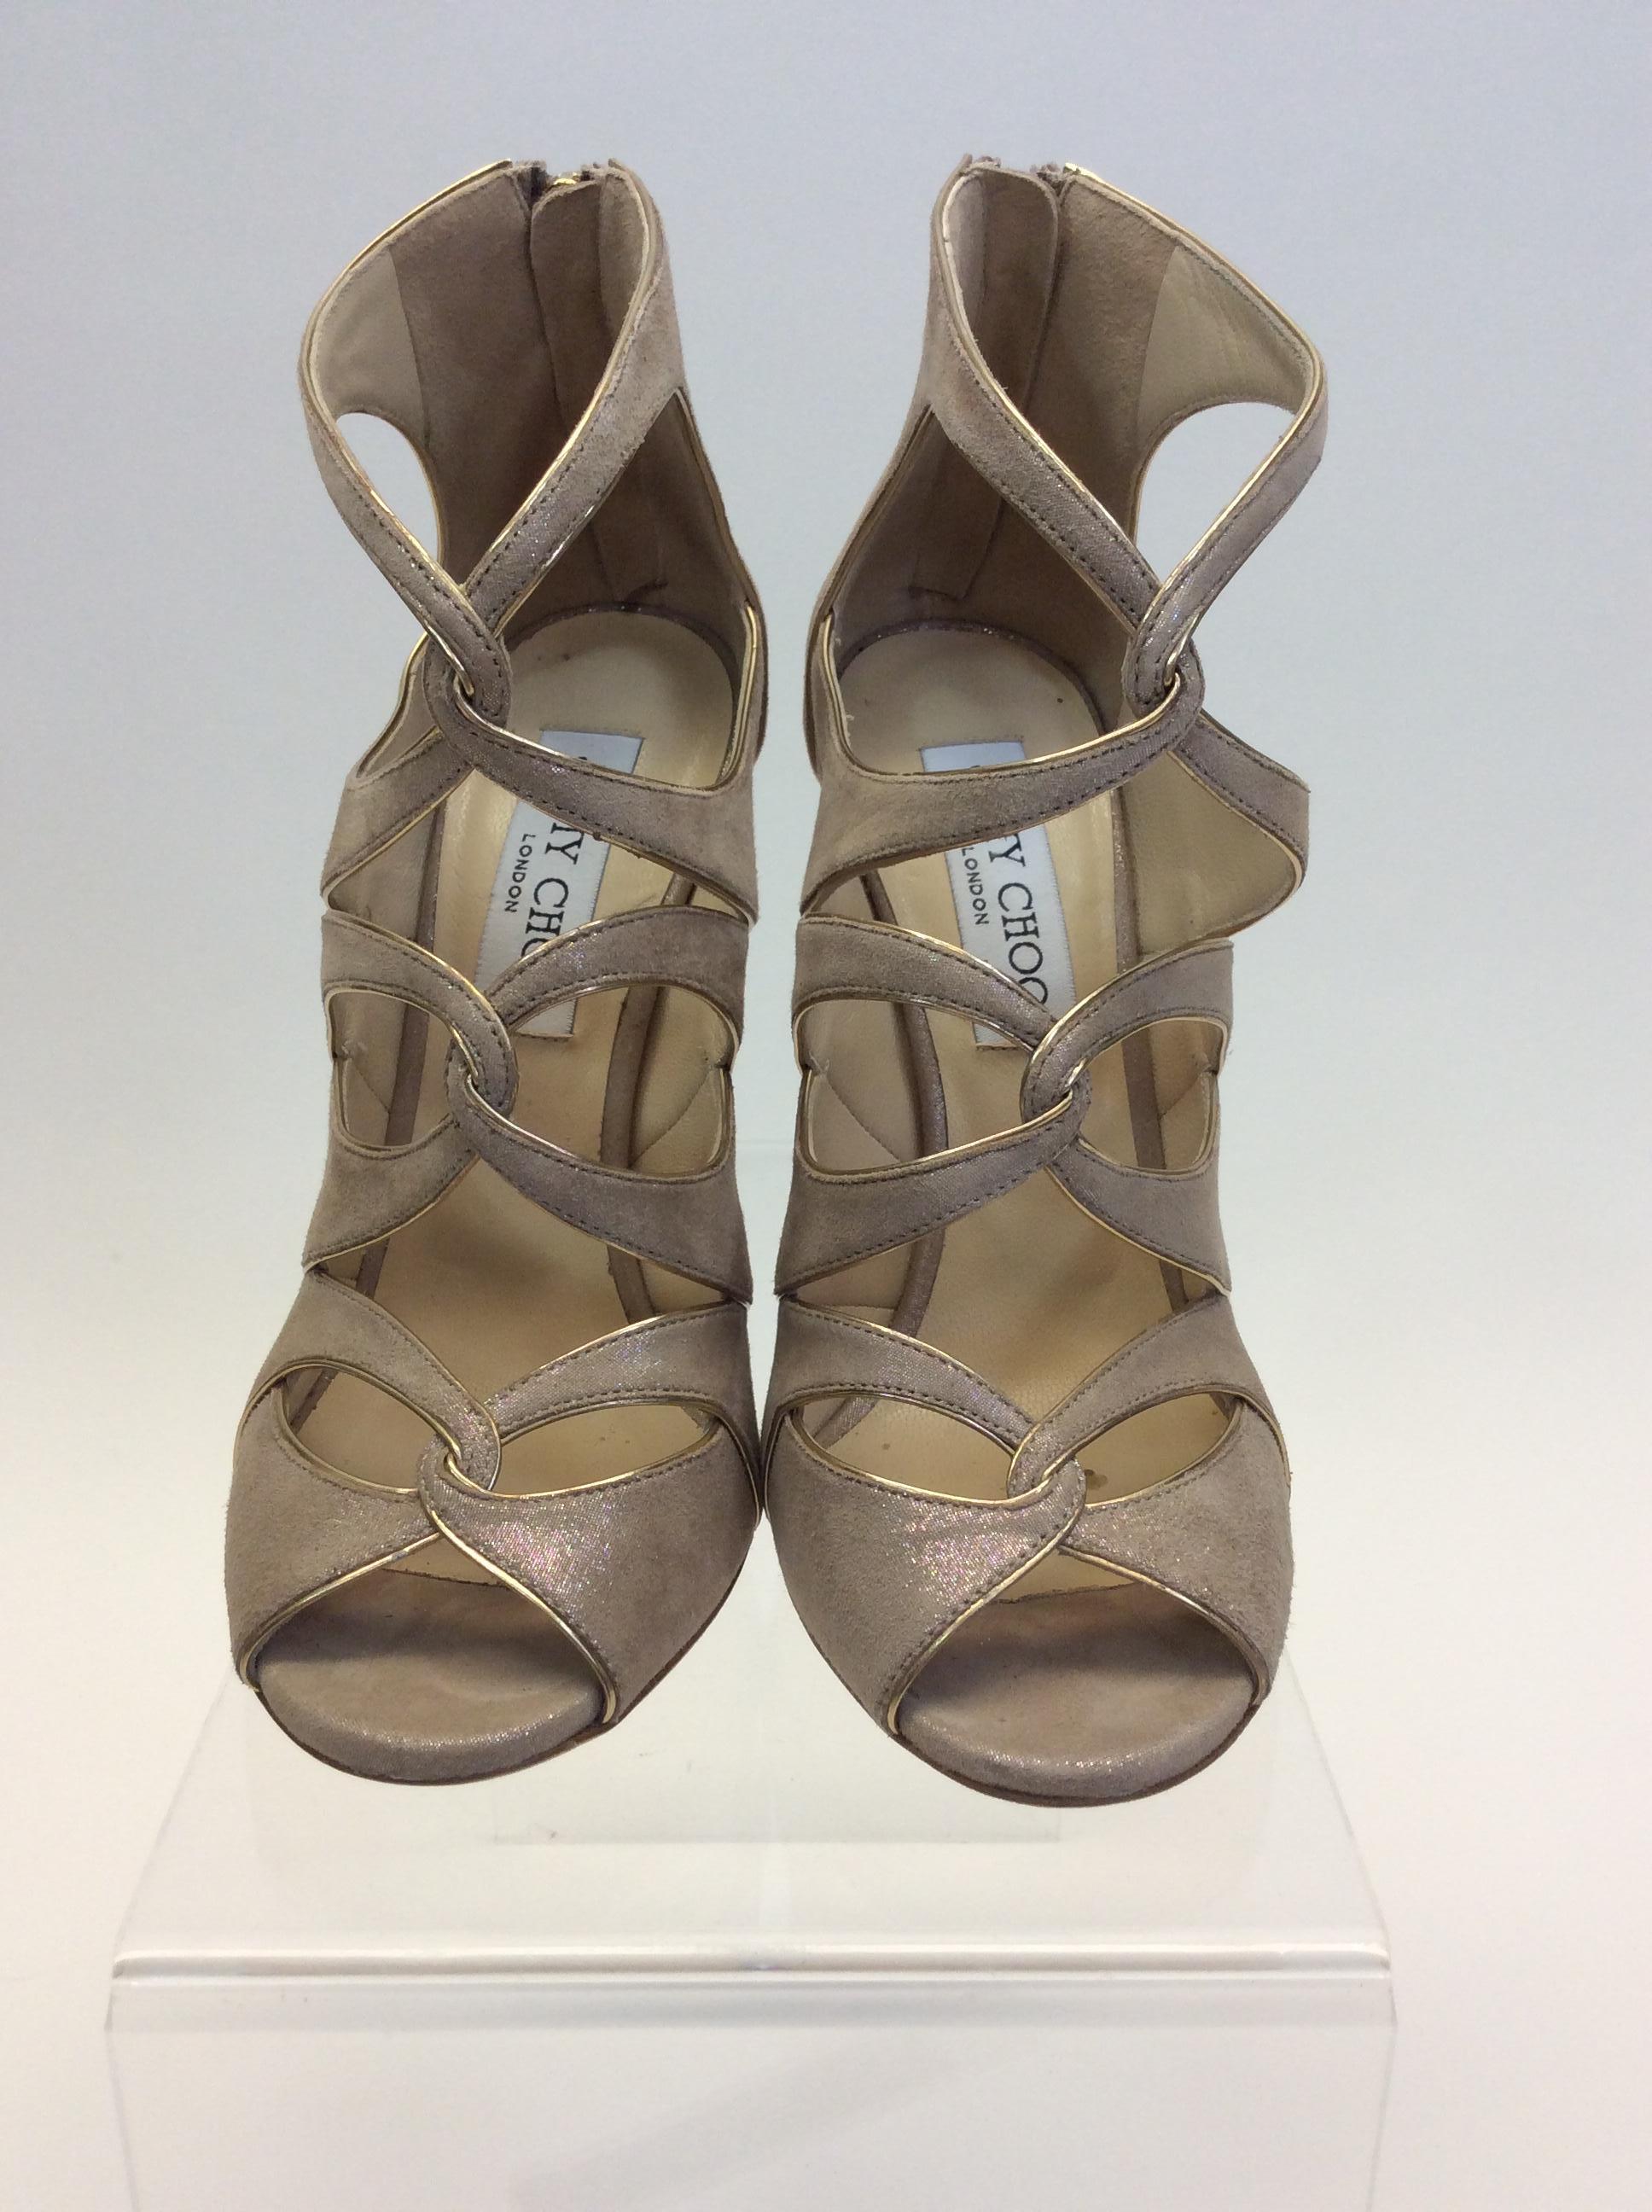 Jimmy Choo Gold and Tan Heels
$695
Made in Italy
Size 36
4.5” heel